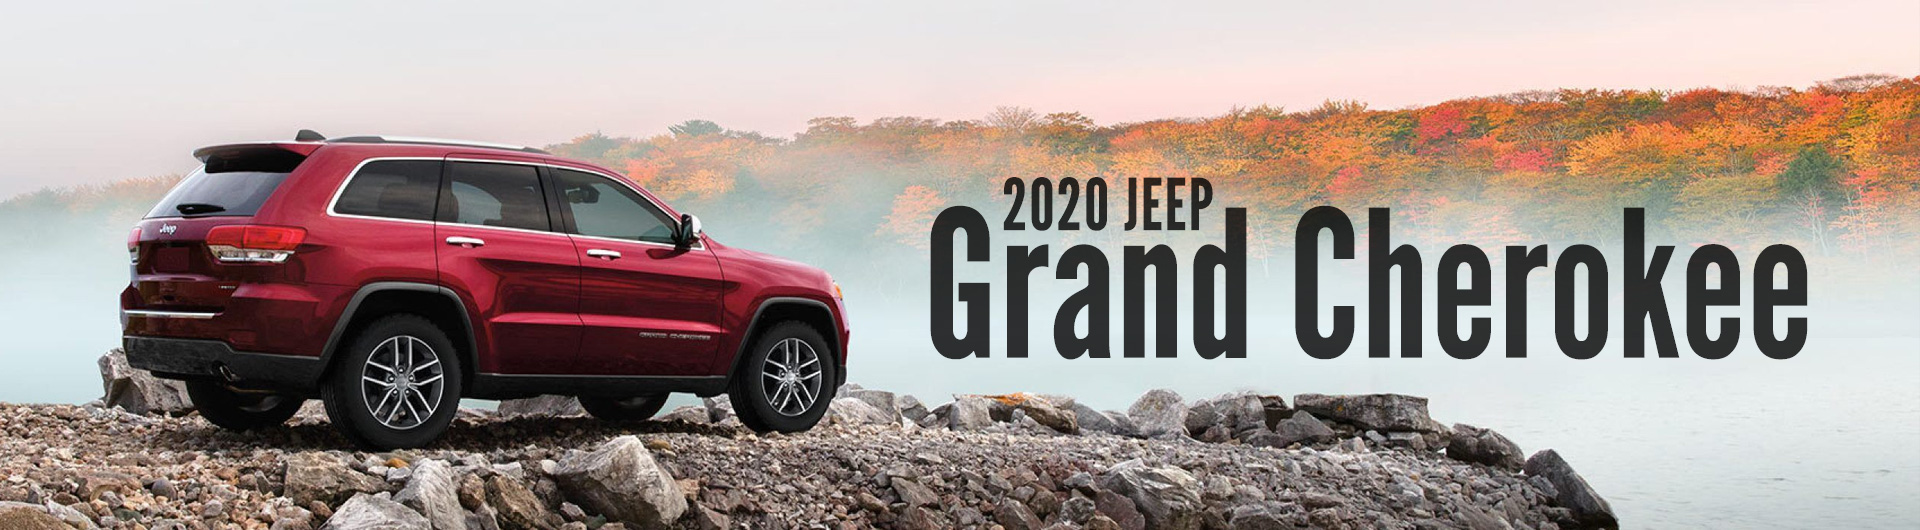 A New 2020 Jeep Grand Cherokee At Joe Cooper Dodge Jeep In